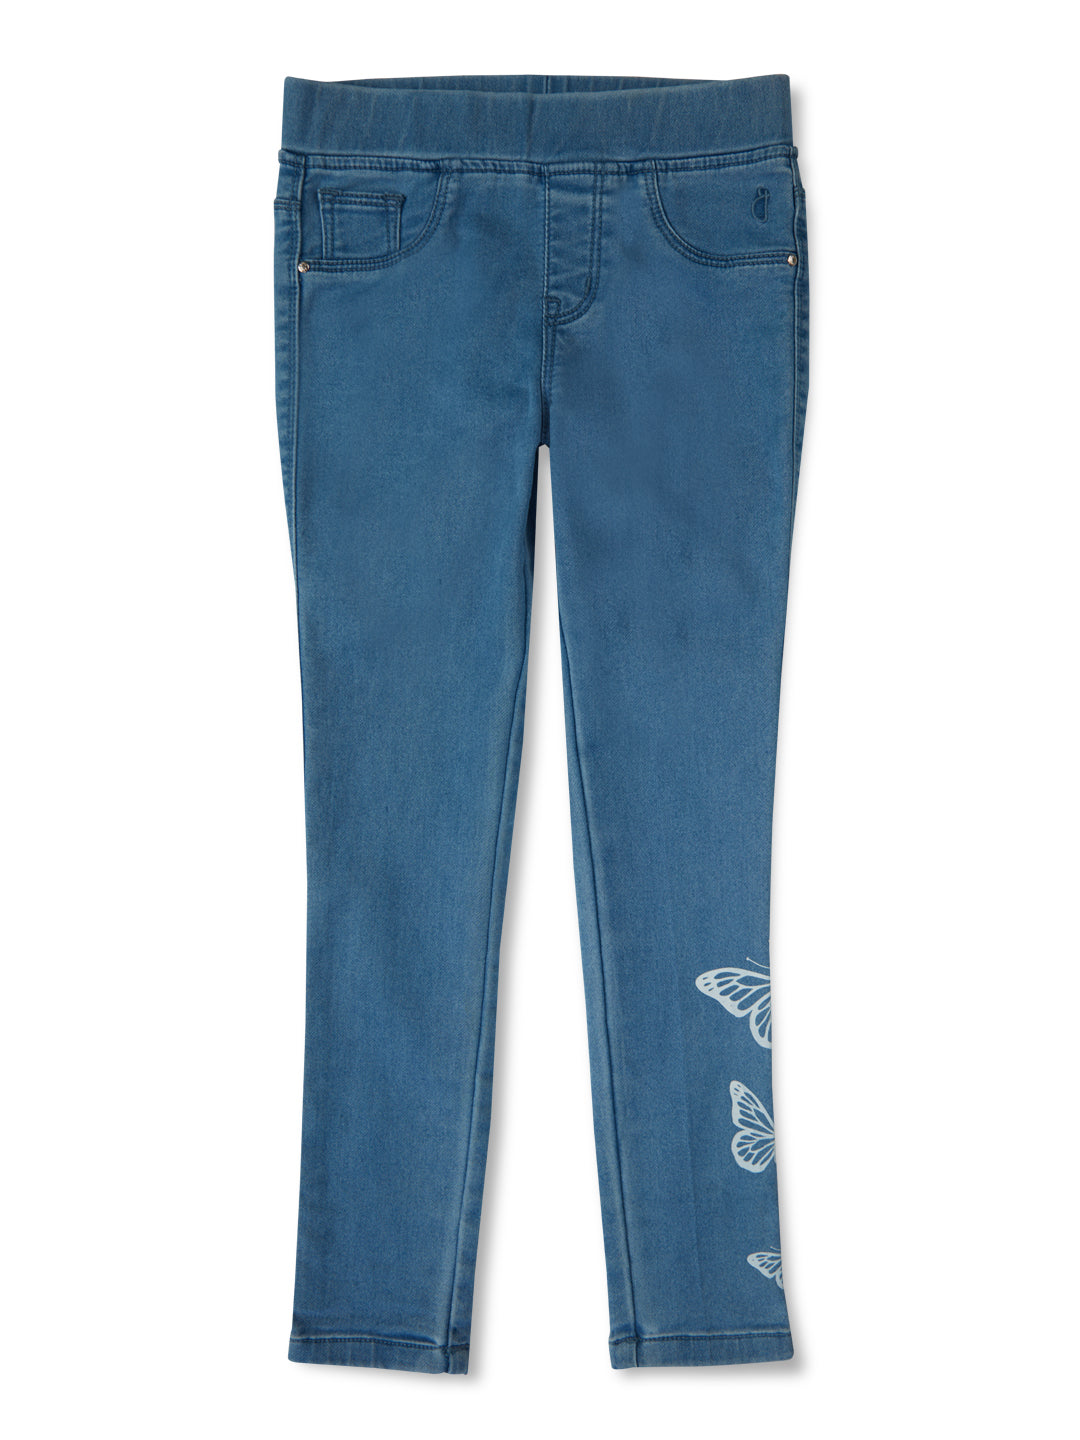 Girls Blue Solid Cotton Jeggings Elasticated